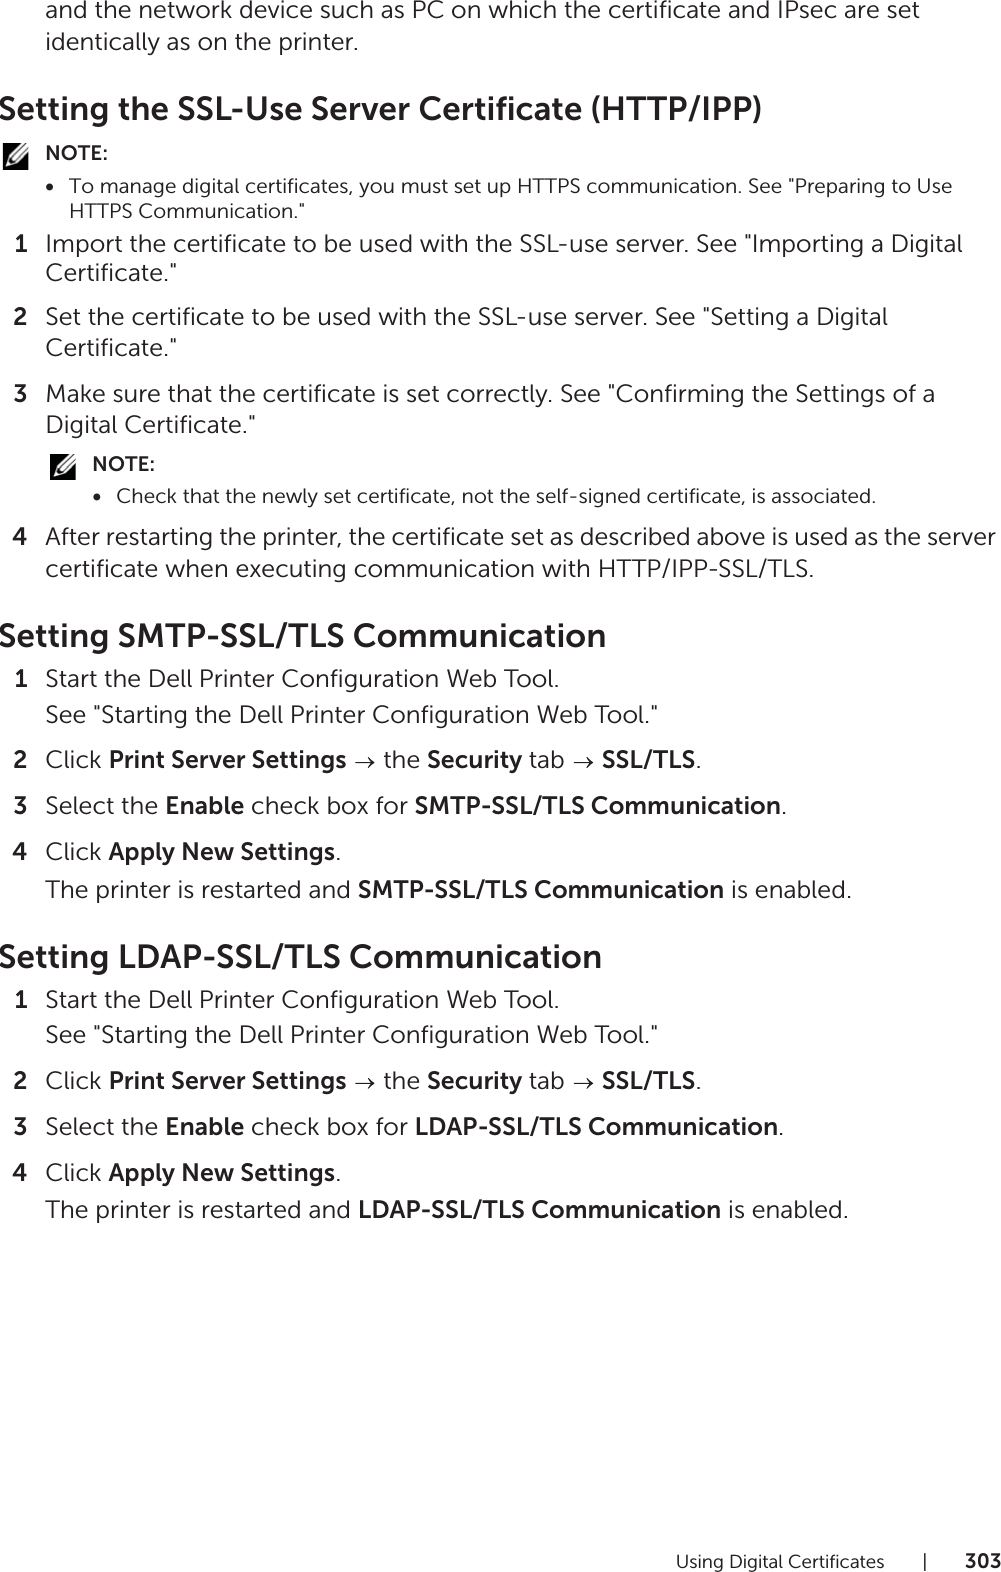 Using Digital Certificates |303and the network device such as PC on which the certificate and IPsec are set identically as on the printer.Setting the SSL-Use Server Certificate (HTTP/IPP)NOTE:•To manage digital certificates, you must set up HTTPS communication. See &quot;Preparing to Use HTTPS Communication.&quot;1Import the certificate to be used with the SSL-use server. See &quot;Importing a Digital Certificate.&quot;2Set the certificate to be used with the SSL-use server. See &quot;Setting a Digital Certificate.&quot;3Make sure that the certificate is set correctly. See &quot;Confirming the Settings of a Digital Certificate.&quot;NOTE:•Check that the newly set certificate, not the self-signed certificate, is associated.4After restarting the printer, the certificate set as described above is used as the server certificate when executing communication with HTTP/IPP-SSL/TLS.Setting SMTP-SSL/TLS Communication1Start the Dell Printer Configuration Web Tool.See &quot;Starting the Dell Printer Configuration Web Tool.&quot;2Click Print Server Settings  the Security tab   SSL/TLS.3Select the Enable check box for SMTP-SSL/TLS Communication.4Click Apply New Settings.The printer is restarted and SMTP-SSL/TLS Communication is enabled.Setting LDAP-SSL/TLS Communication1Start the Dell Printer Configuration Web Tool.See &quot;Starting the Dell Printer Configuration Web Tool.&quot;2Click Print Server Settings  the Security tab   SSL/TLS.3Select the Enable check box for LDAP-SSL/TLS Communication.4Click Apply New Settings.The printer is restarted and LDAP-SSL/TLS Communication is enabled.